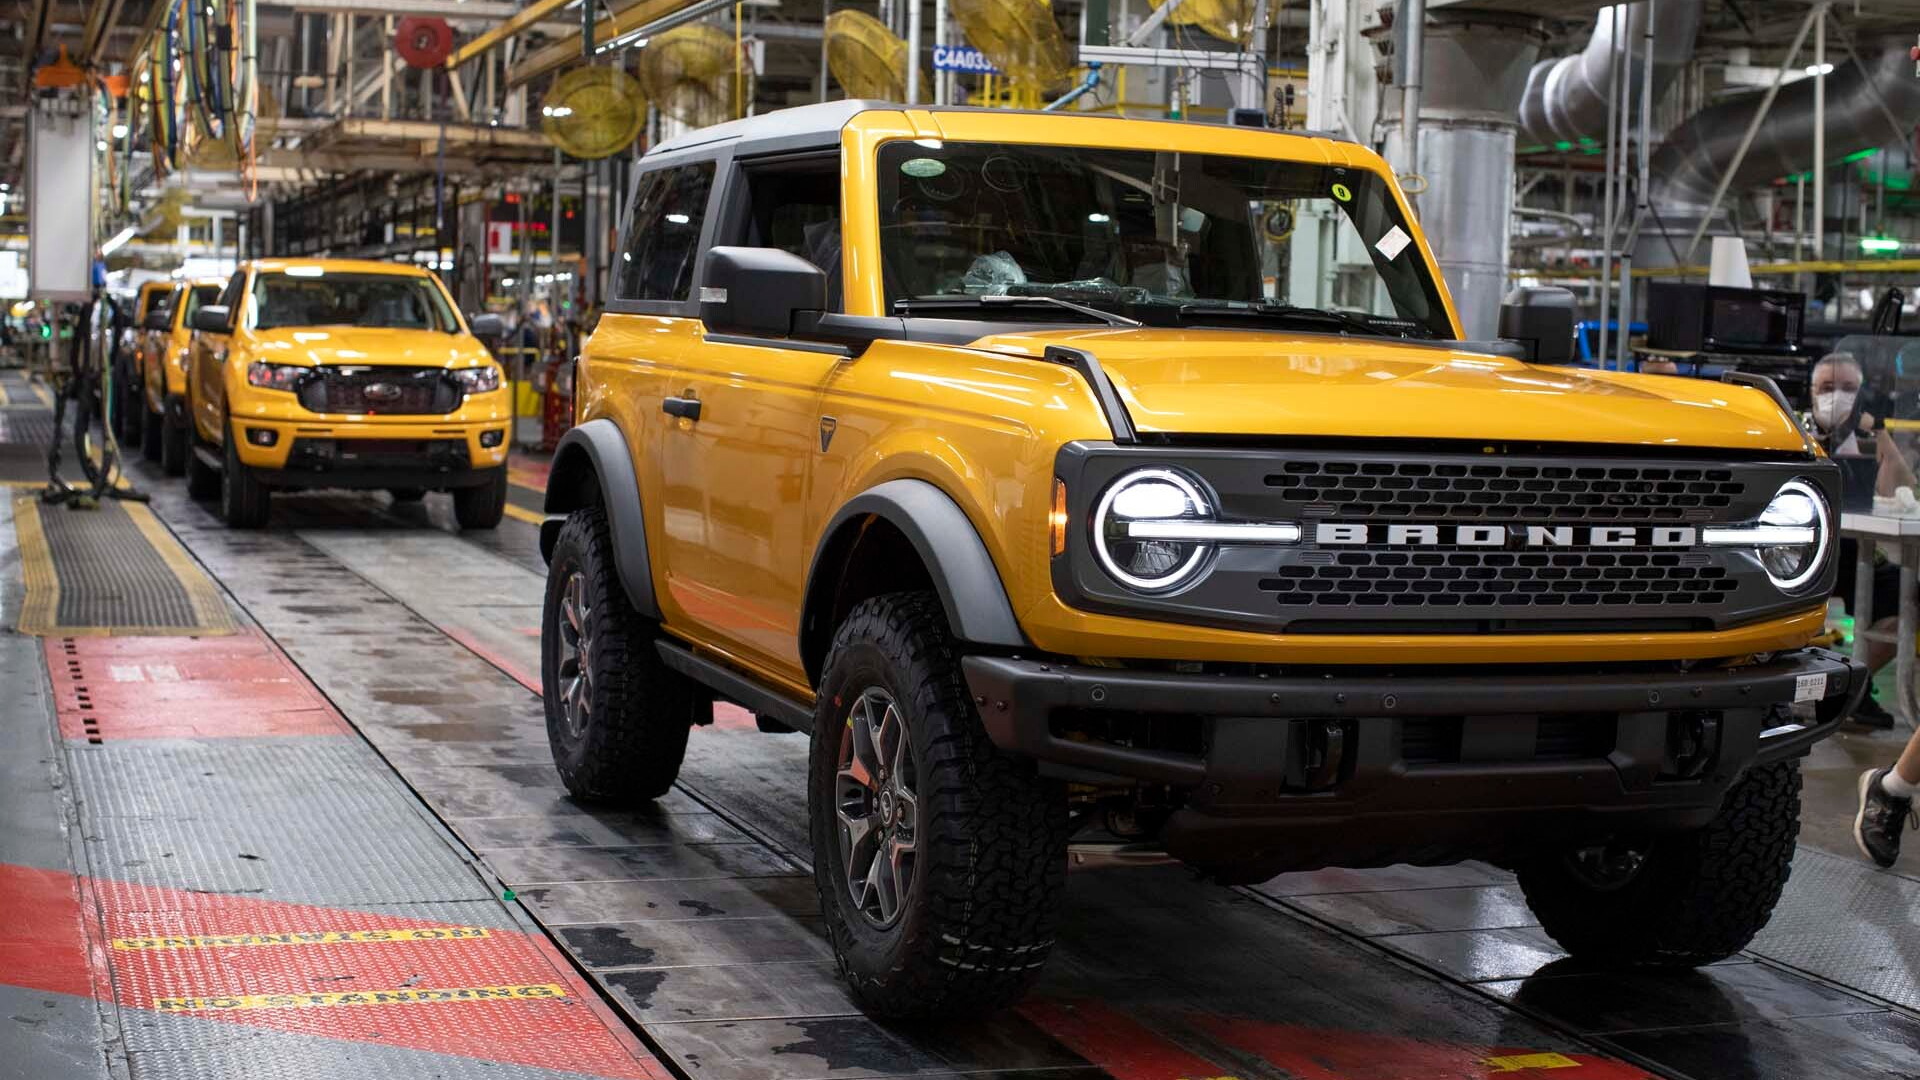 2021 Ford Bronco production starts at Michigan Assembly Plant in Wayne, Michigan